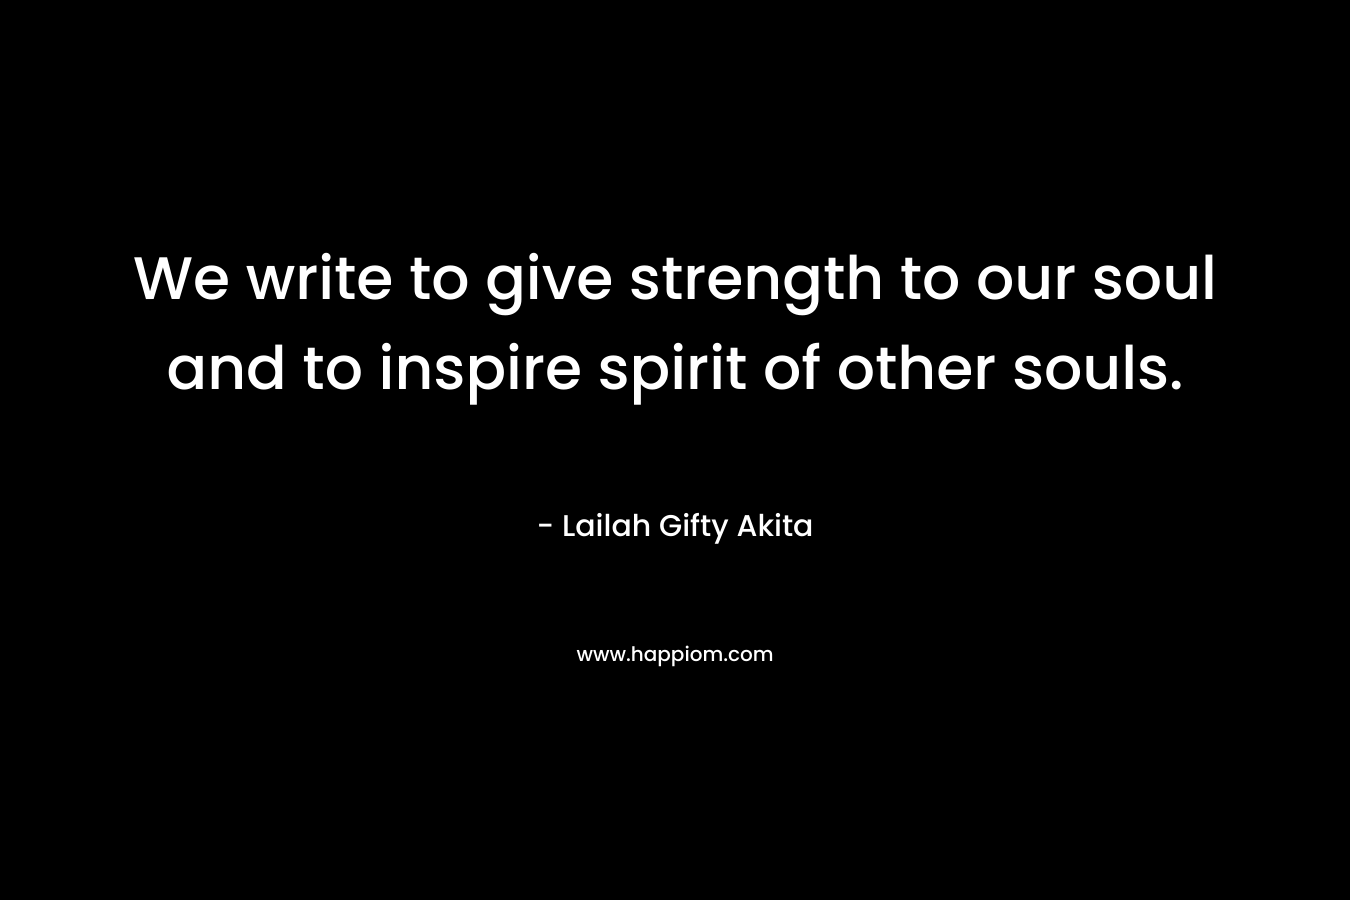 We write to give strength to our soul and to inspire spirit of other souls.